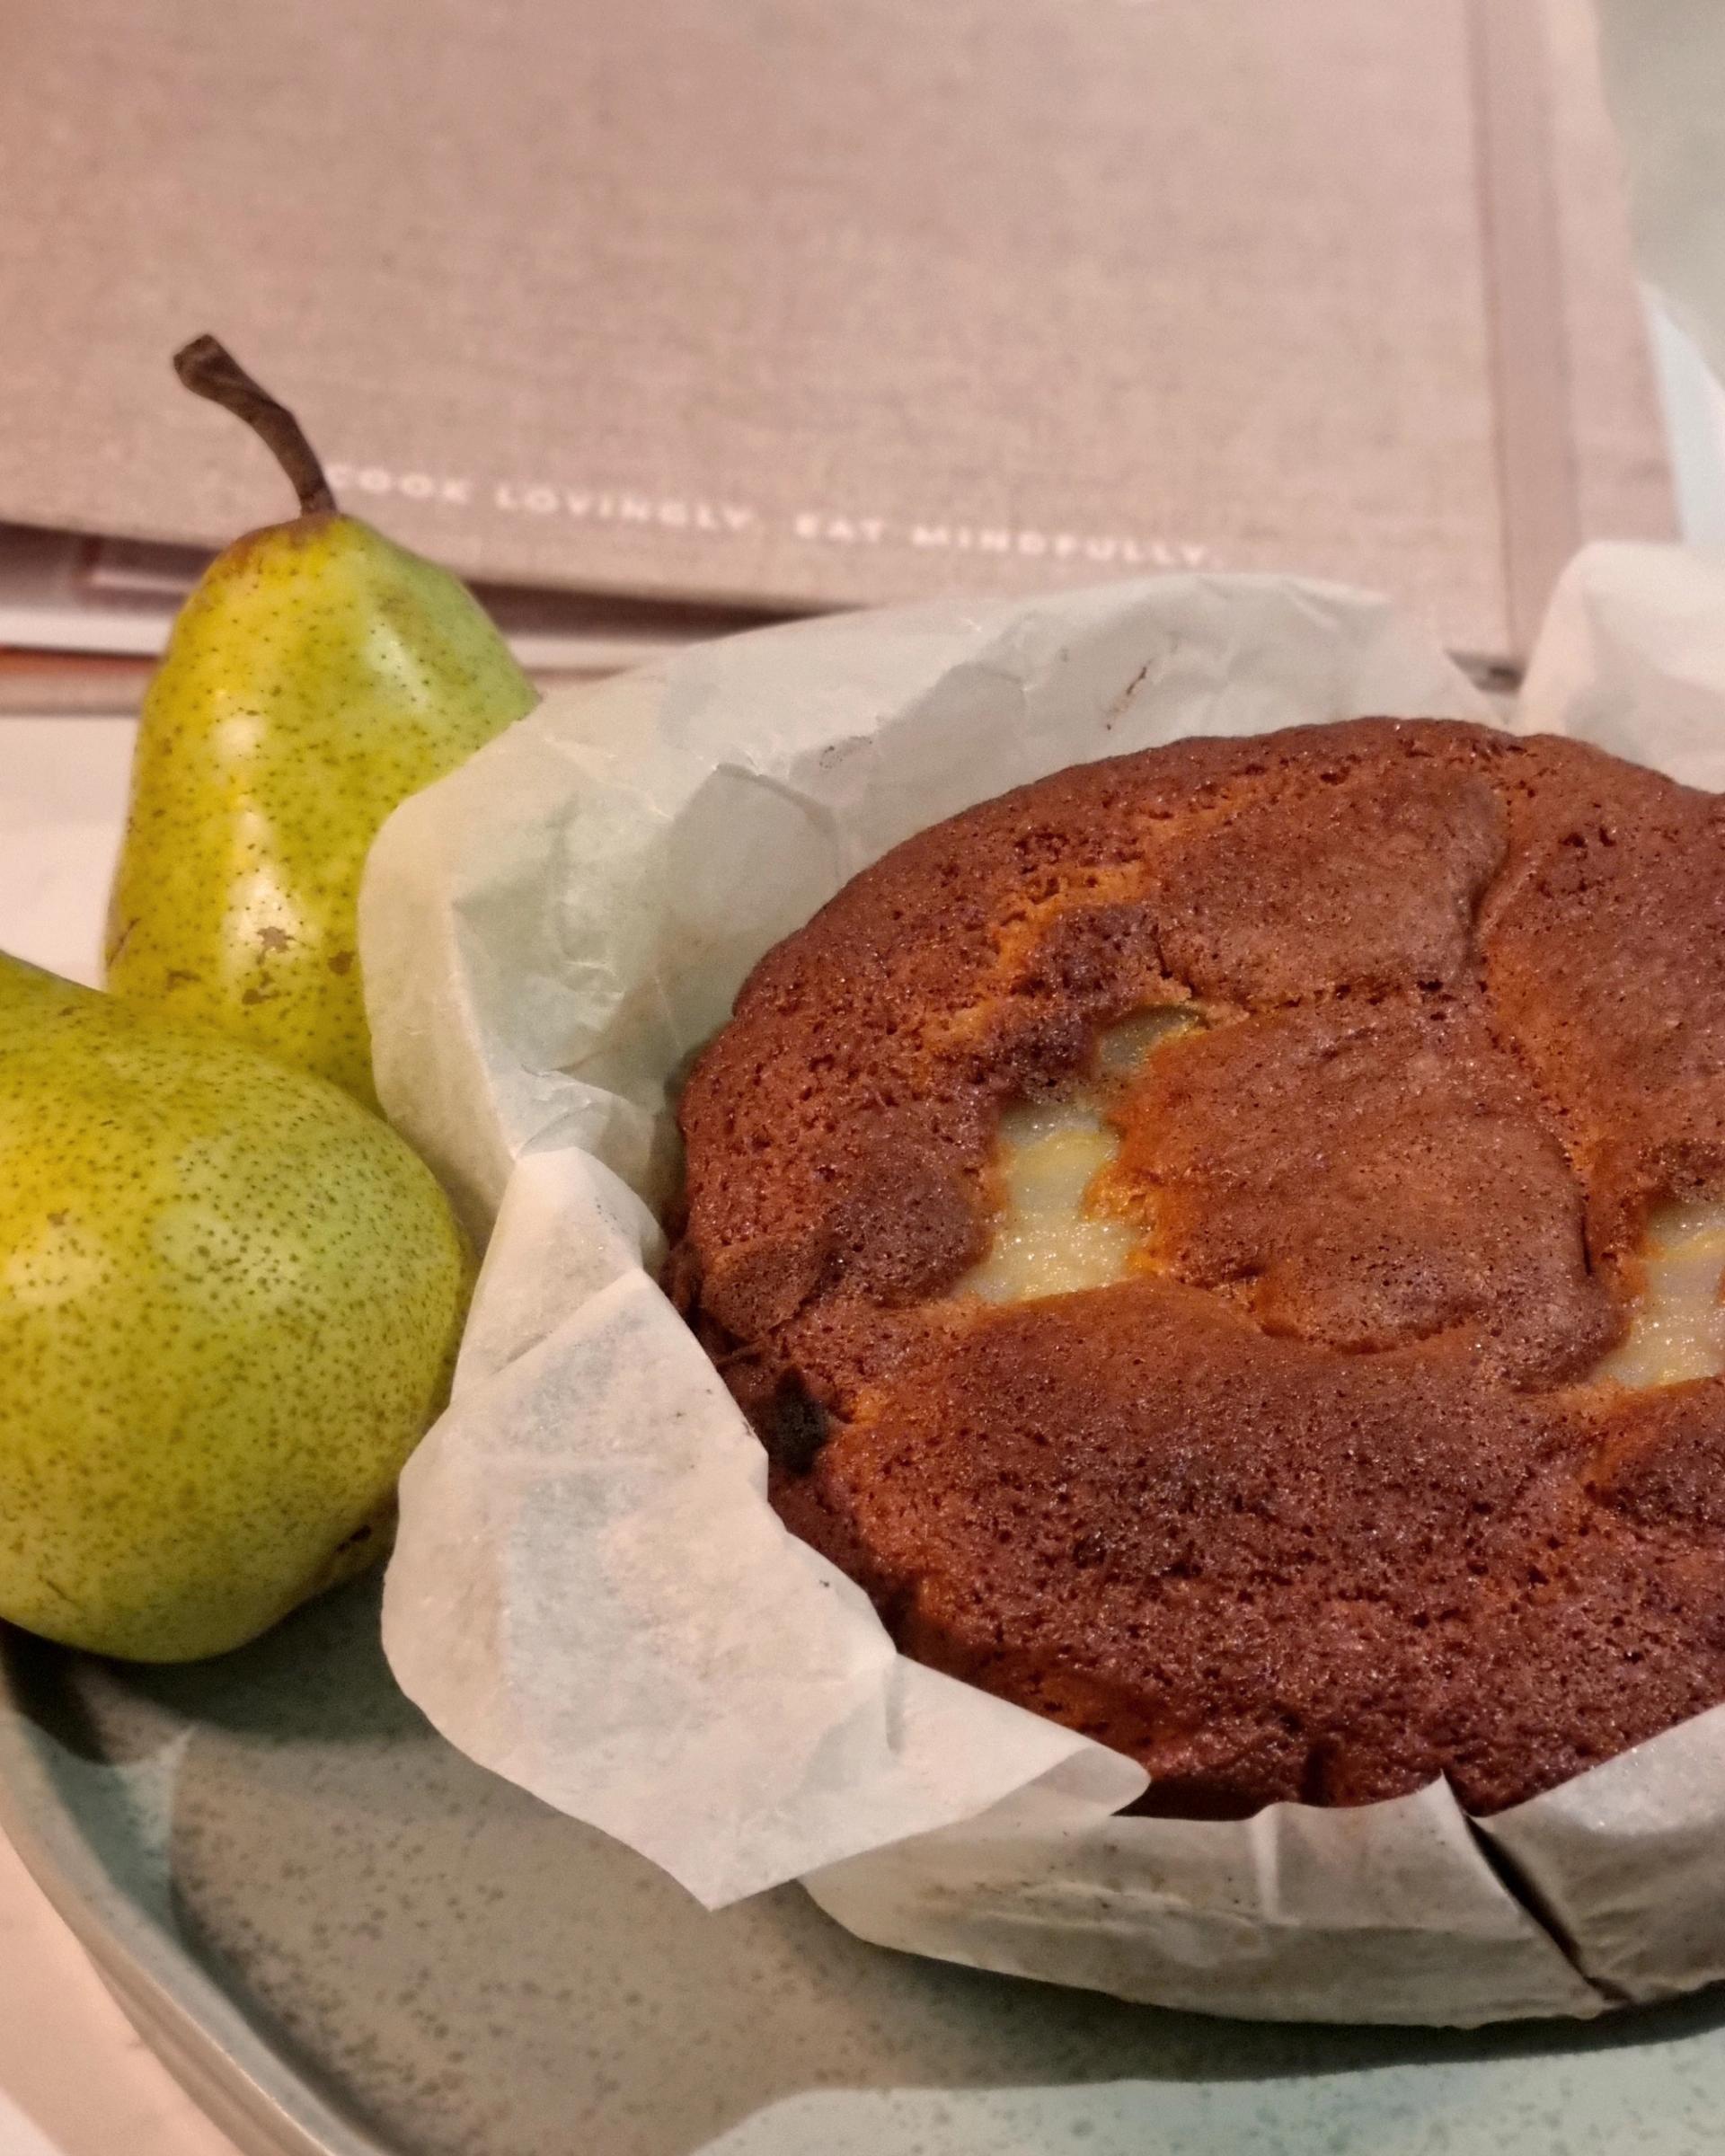 Add this delicious recipe to your collection & enjoy: Pear & Ginger Cake